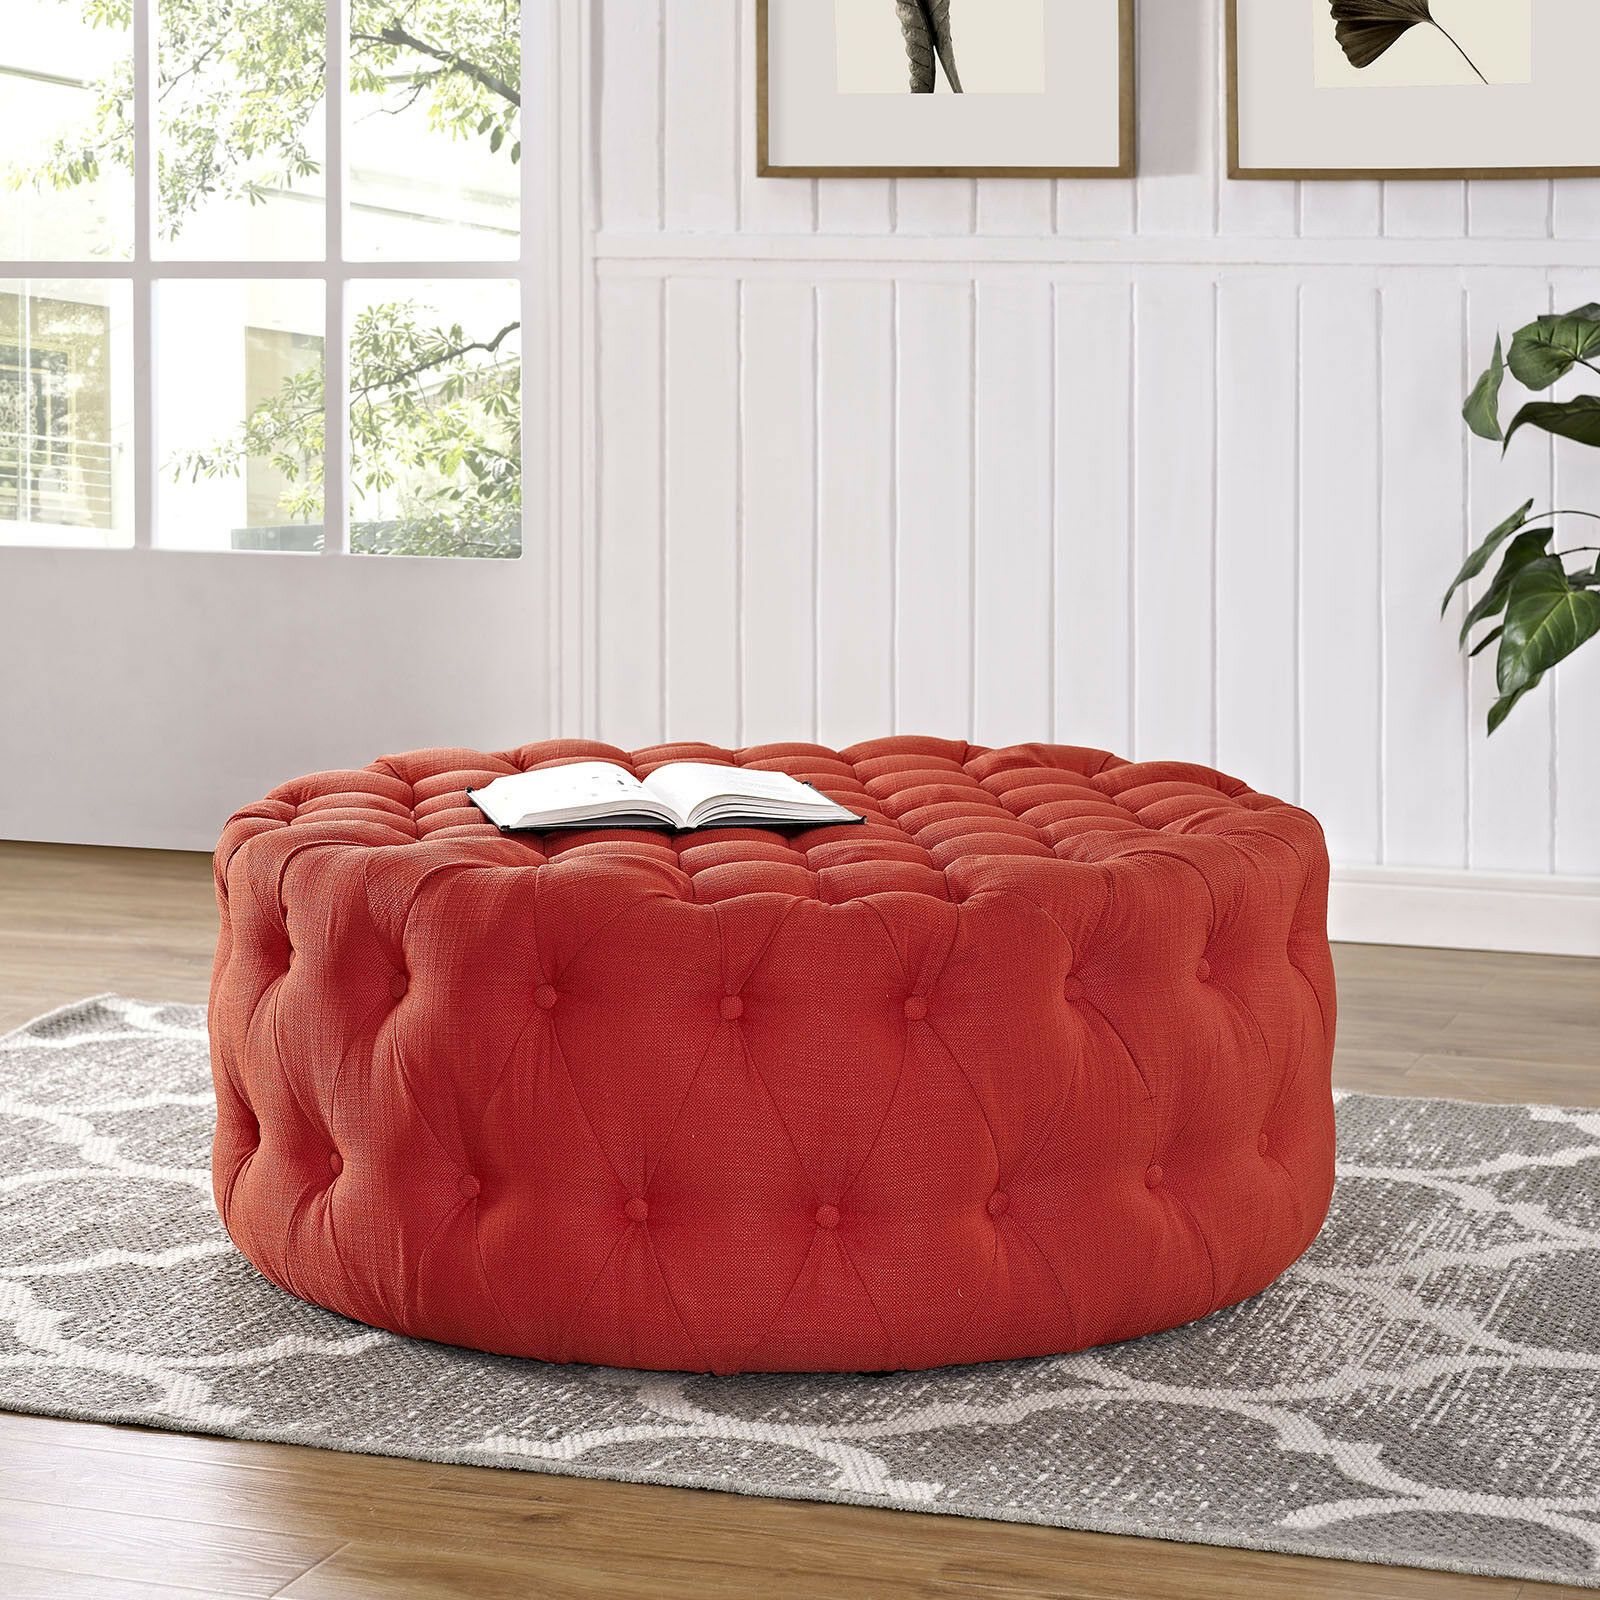 Button Tufted Fabric Upholstered Round Ottoman In Atomic Red Pertaining To Black Fabric Ottomans With Fringe Trim (View 5 of 20)